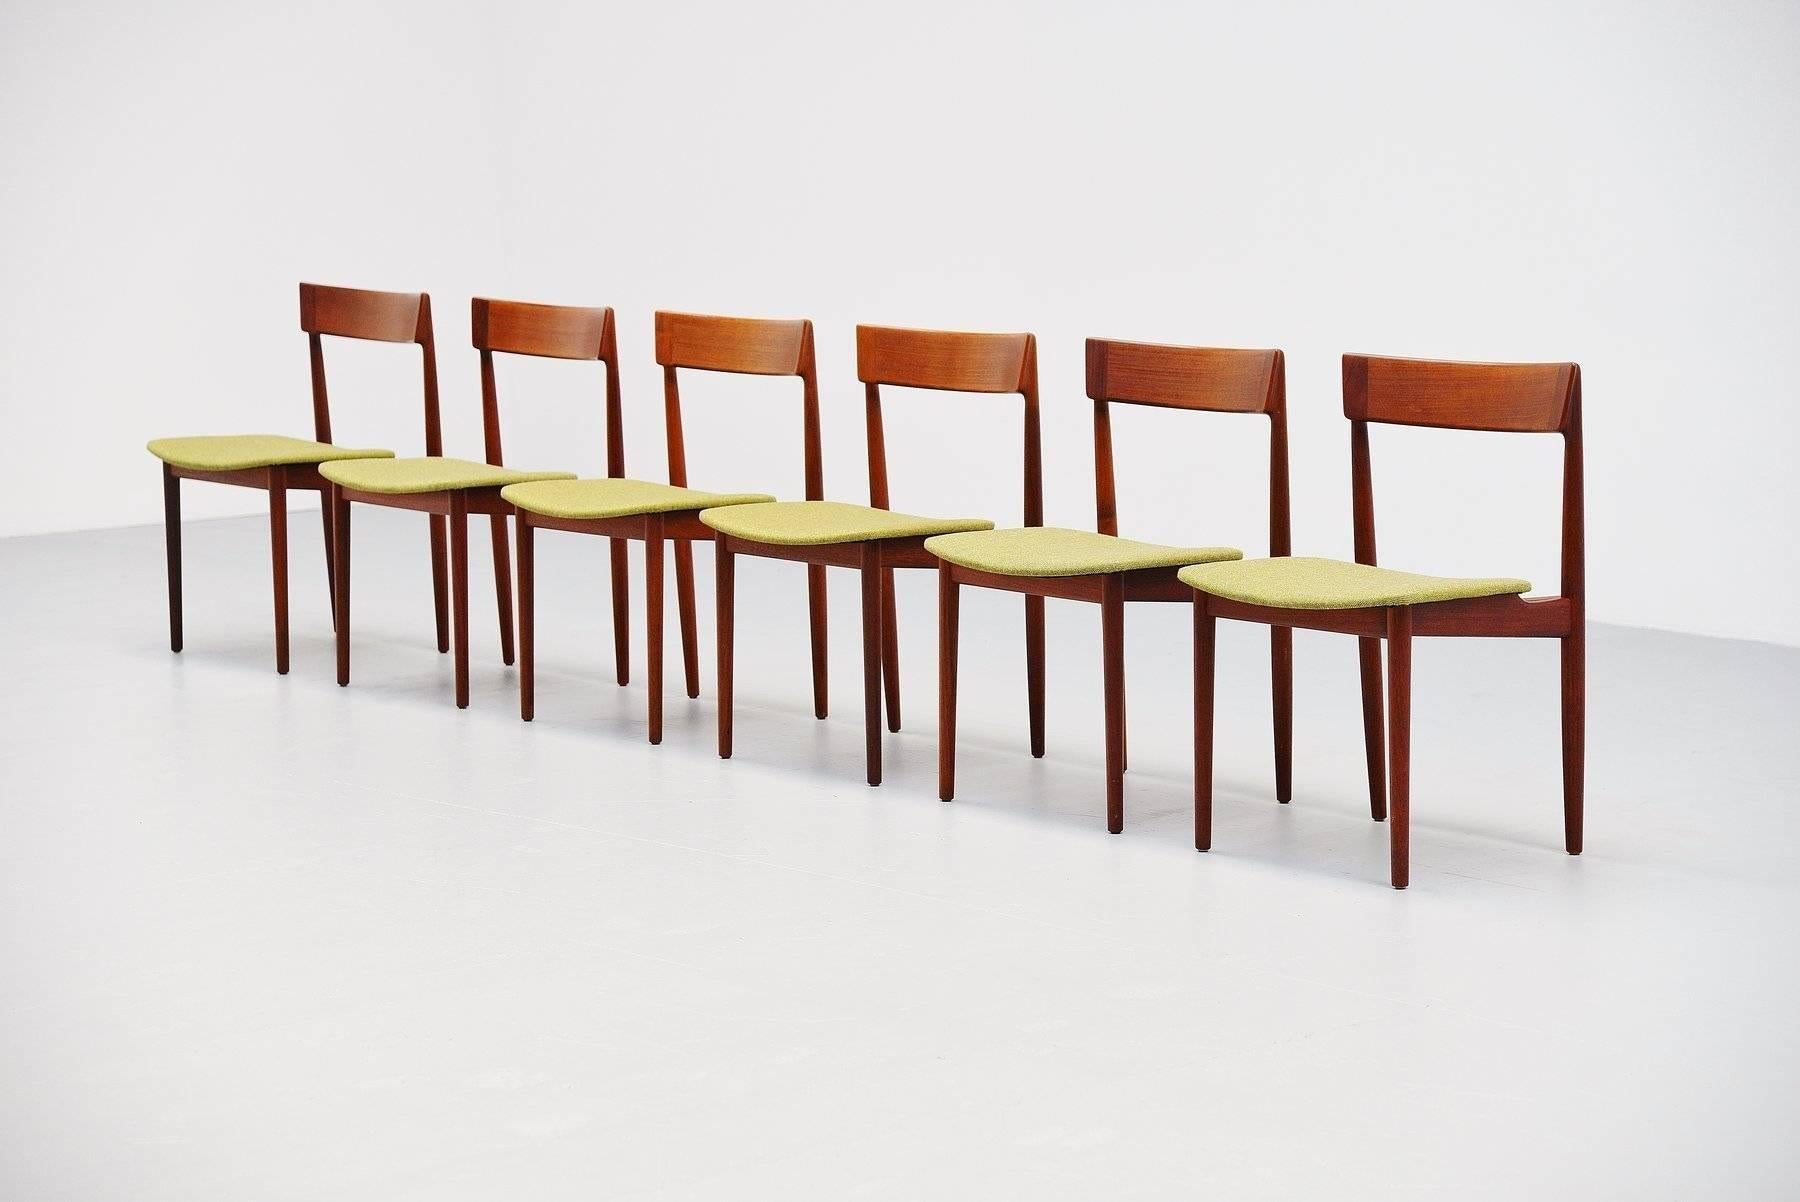 Nice set of six dining chairs designed by Henry Rosengren Hansen for Brande Møbelindustri, Denmark, 1960. These chairs are made of solid teak and have new upholstered seats in forest green. The chairs are very well crafted and all marked with the